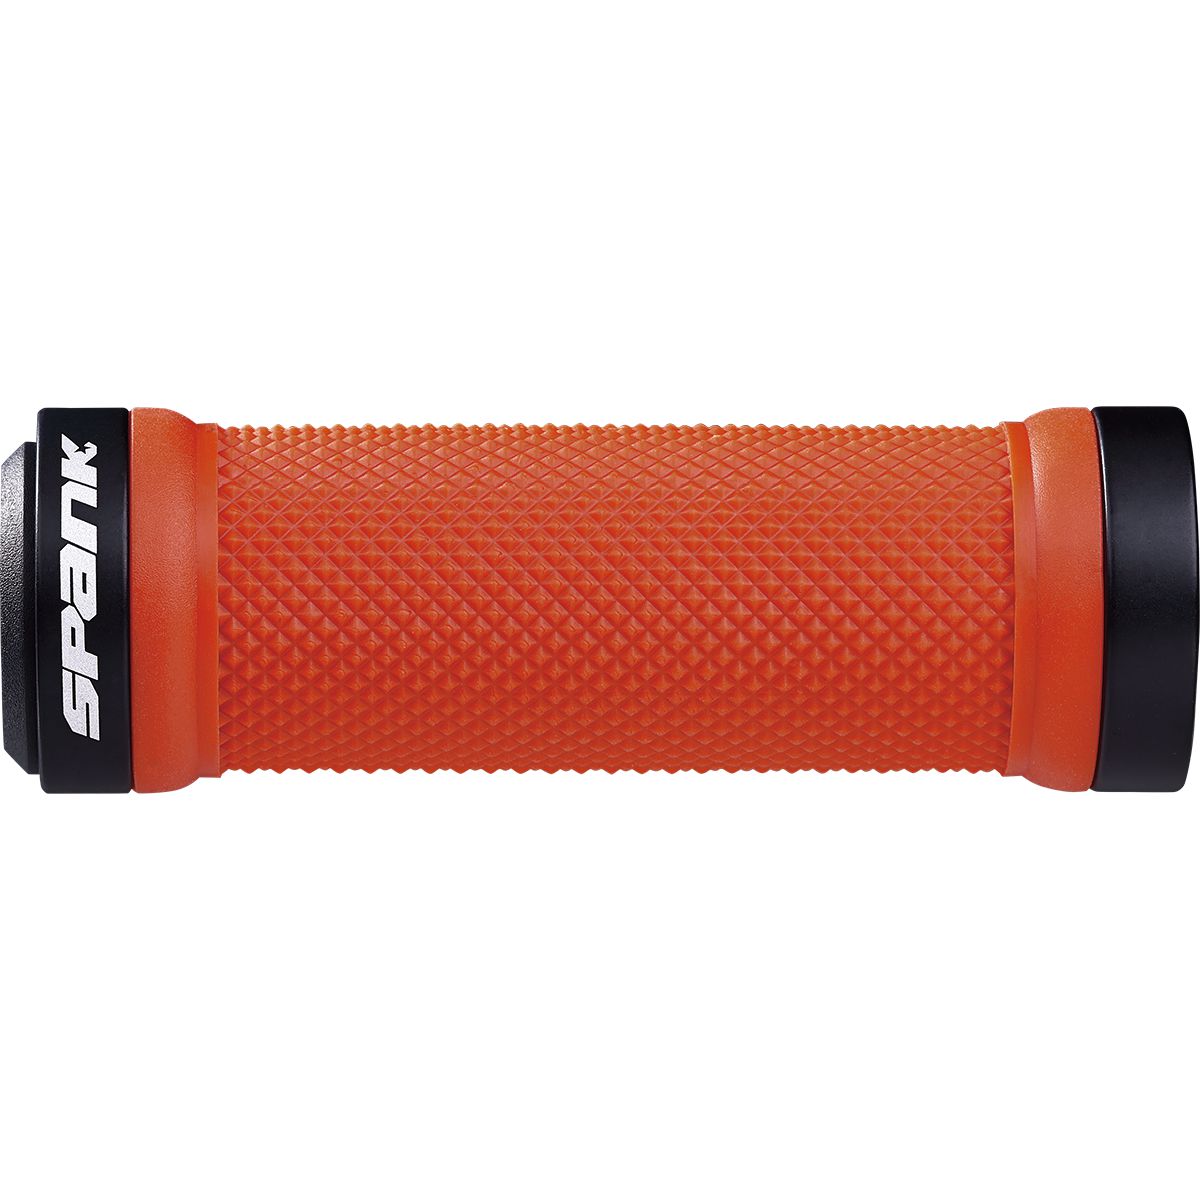 Spank SPANK SPOON Grom Grips - Grips - Bicycle Warehouse